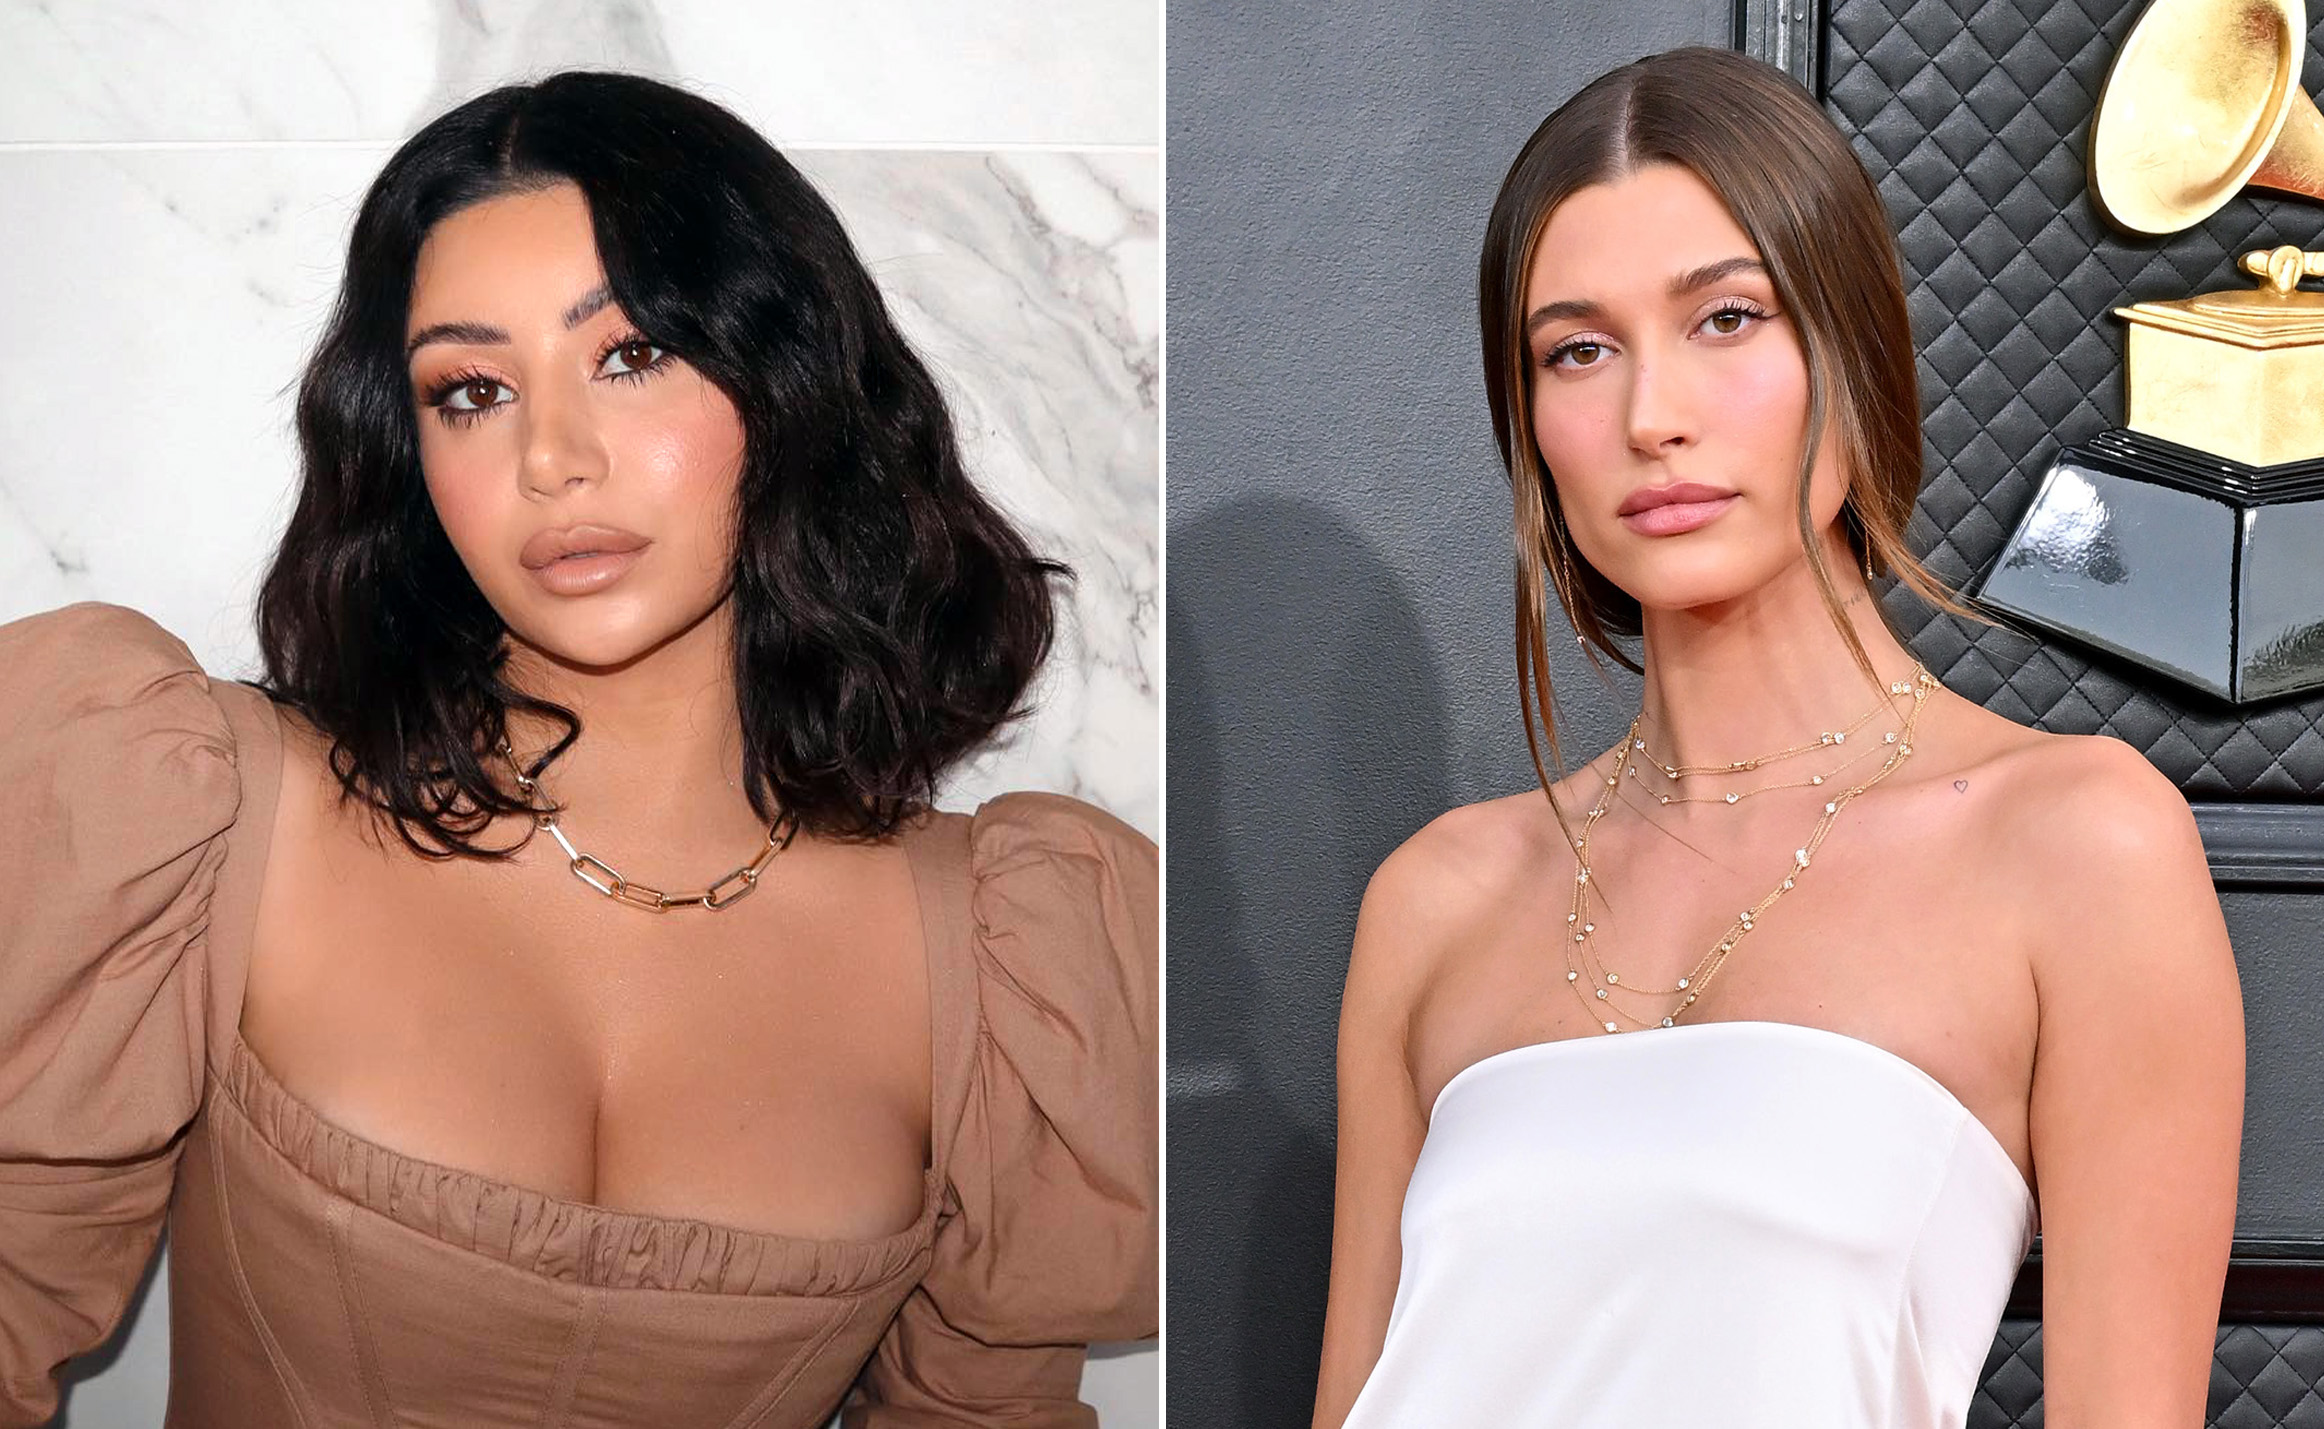 Why MAFS’ Martha Kalifatidis and Hailey Bieber responses to pregnancy rumours are particularly telling